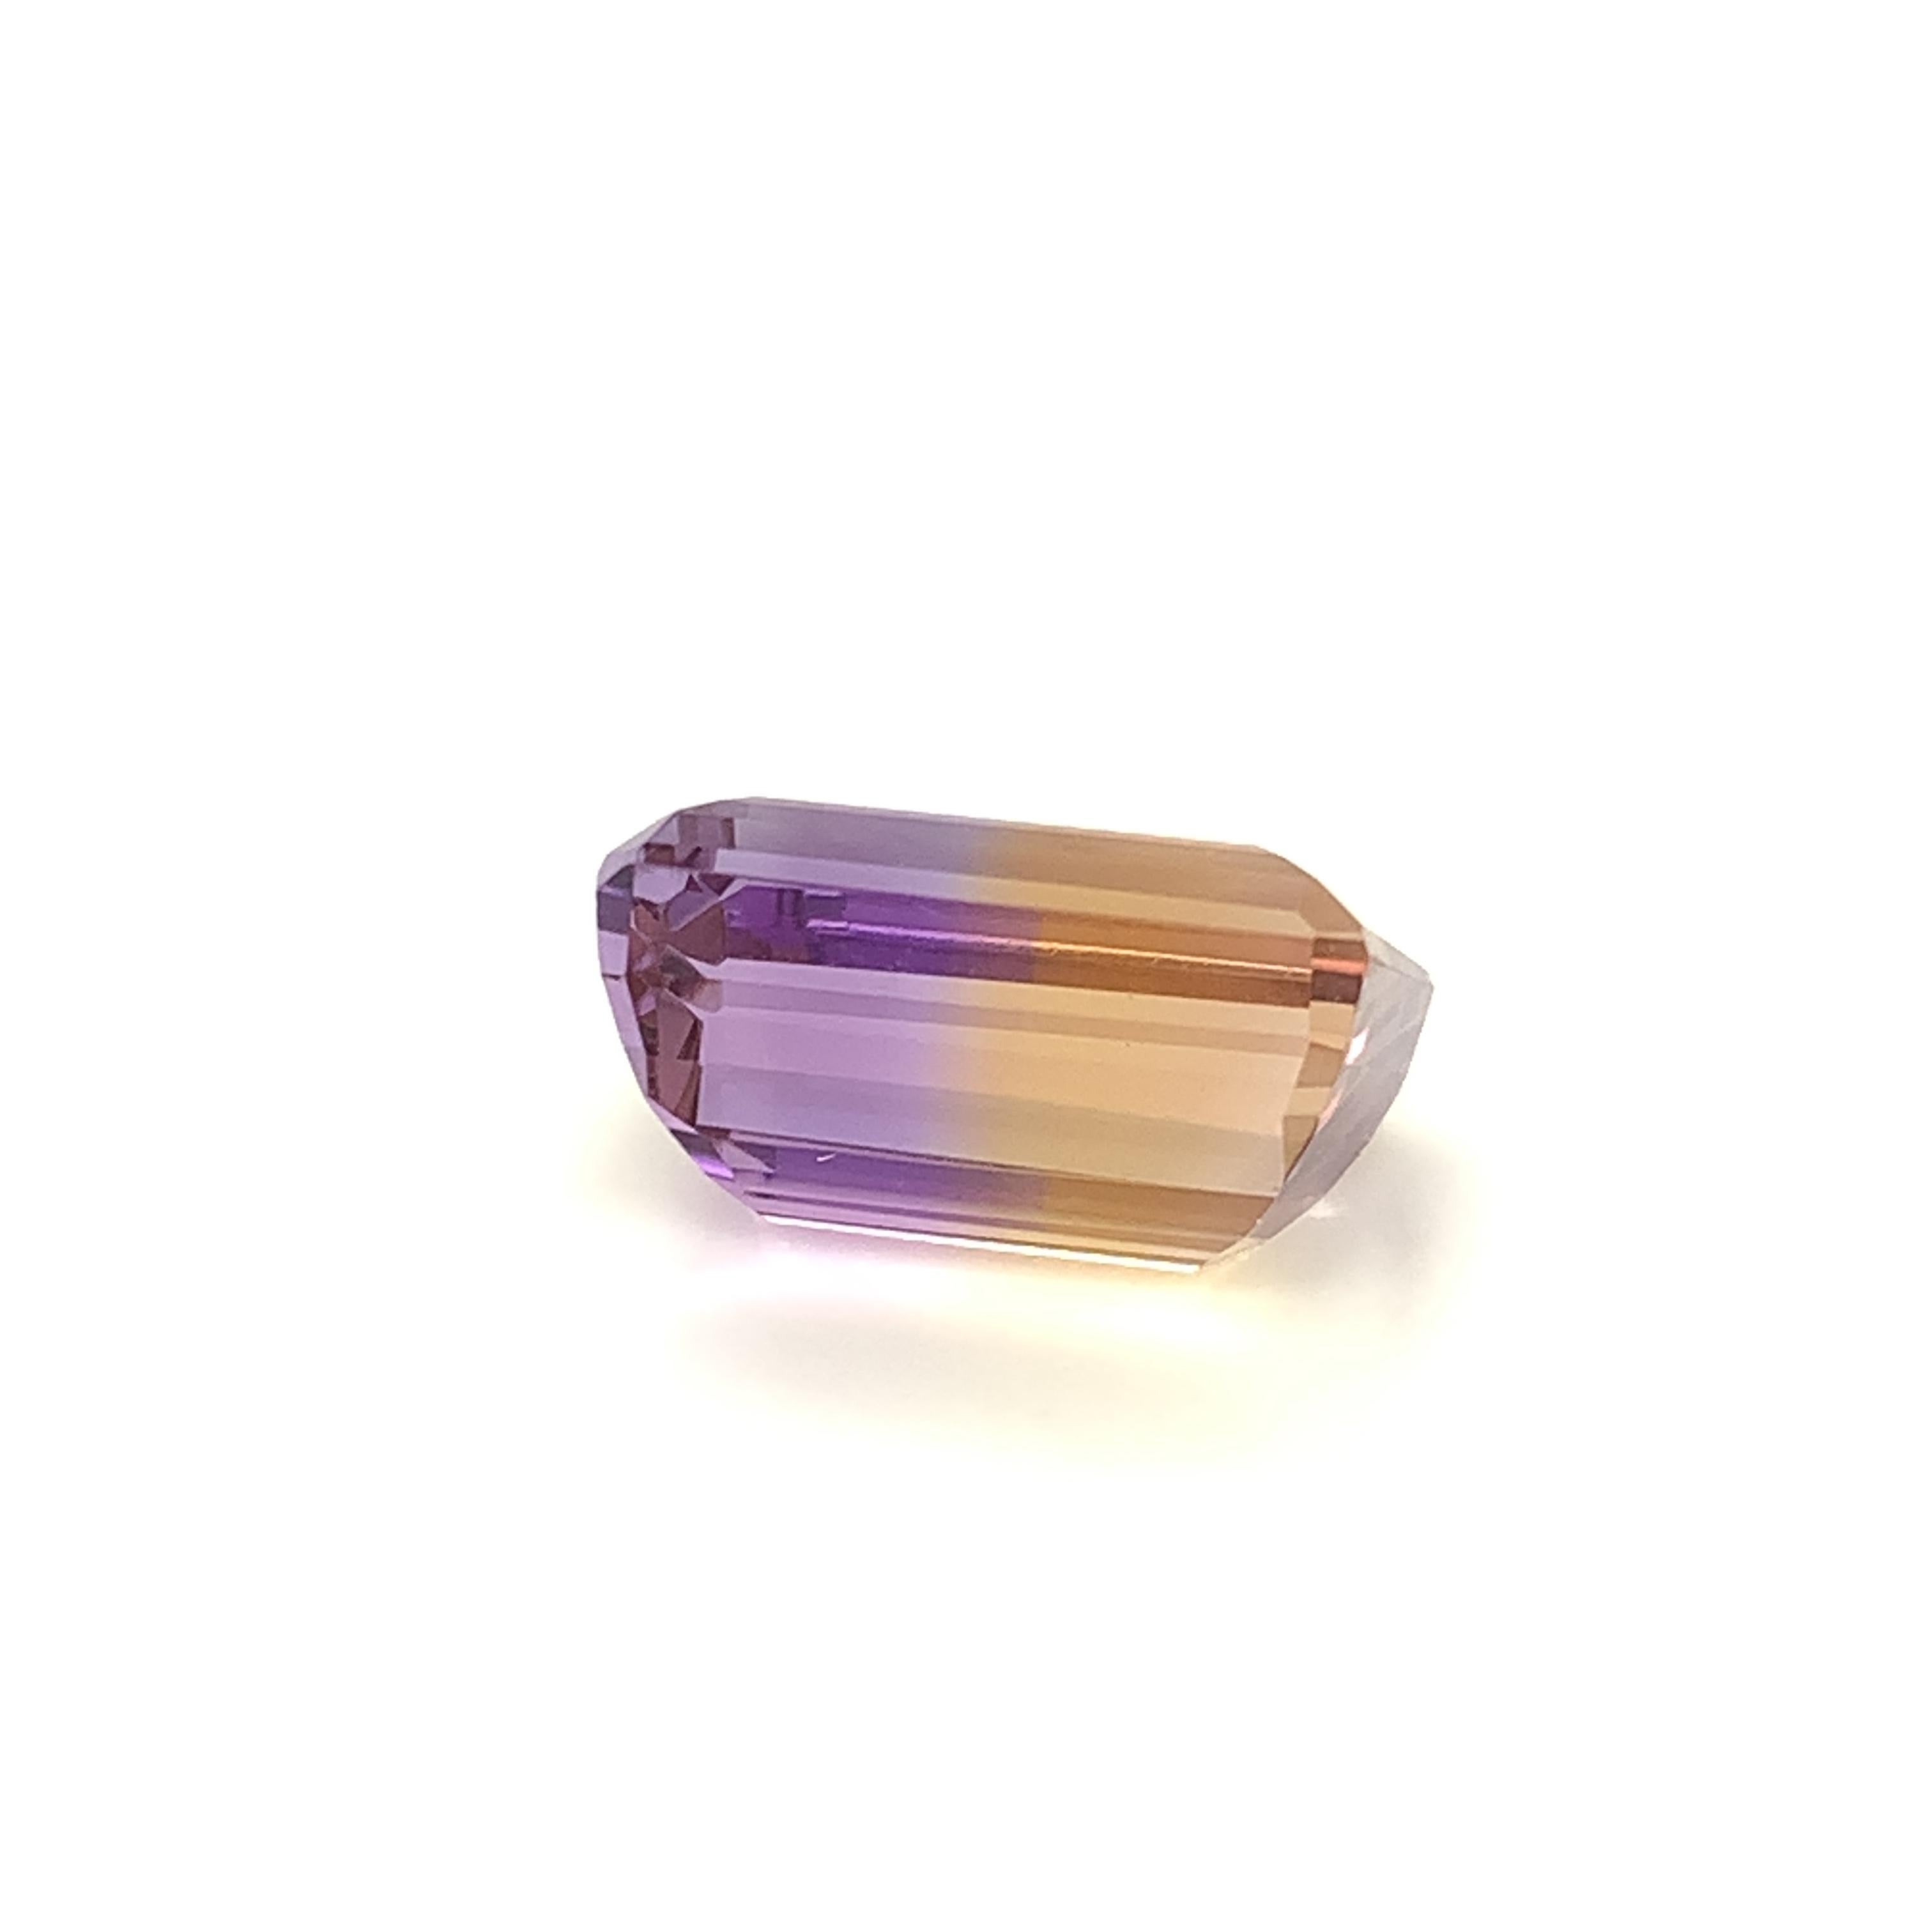 For the gemstone lover who can't decide between amethyst and citrine, ametrine, the gemstone that is a beautiful blend of both is just what you need! This pretty 14.08 carat ametrine is, in fact, a blend of both popular gems - bright purple amethyst